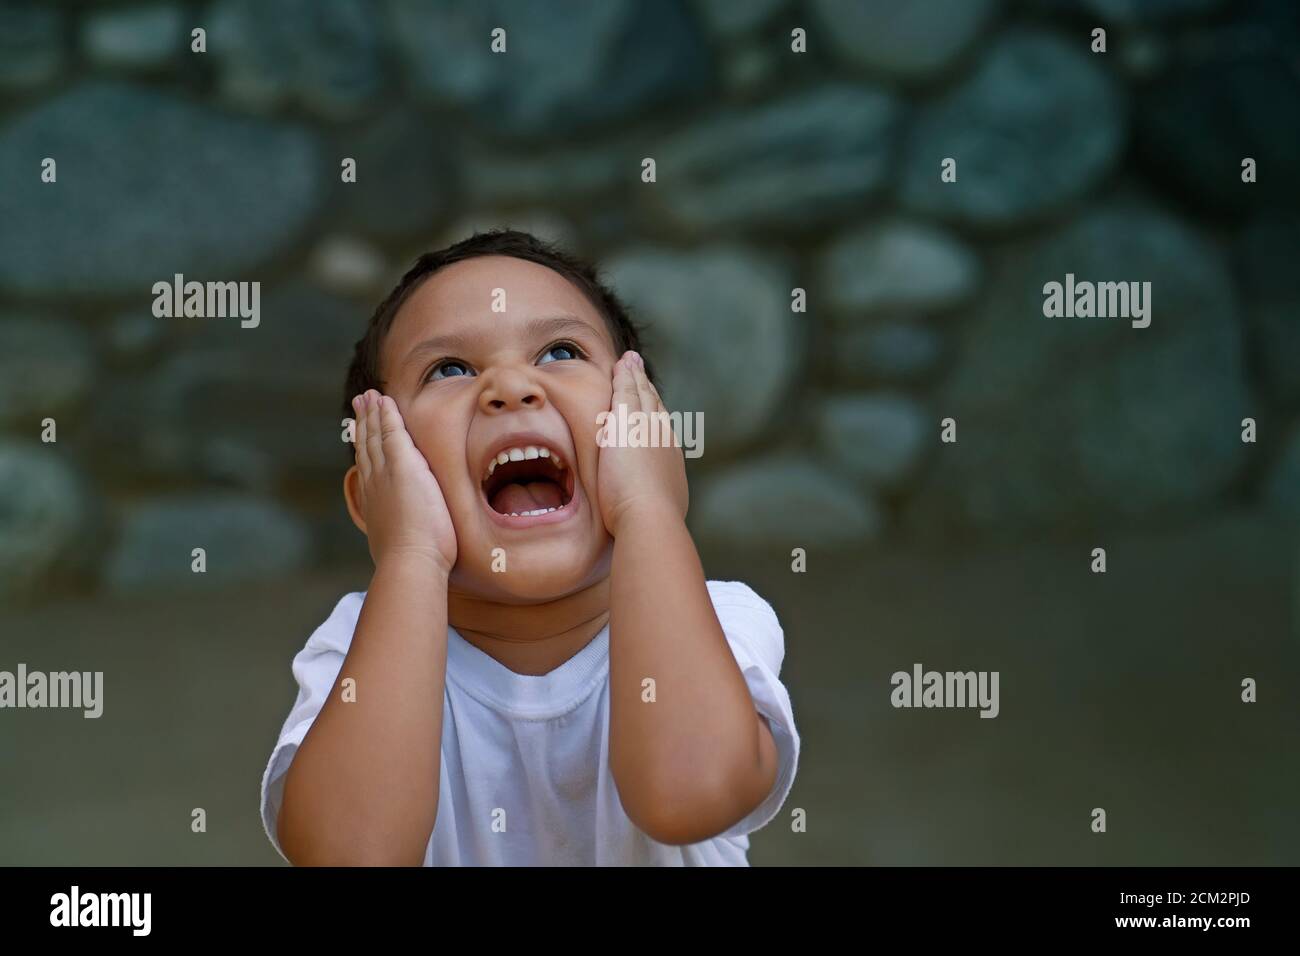 Latino preschooler overwhelmed with happiness holds his face with both hands and screams really loud. Stock Photo